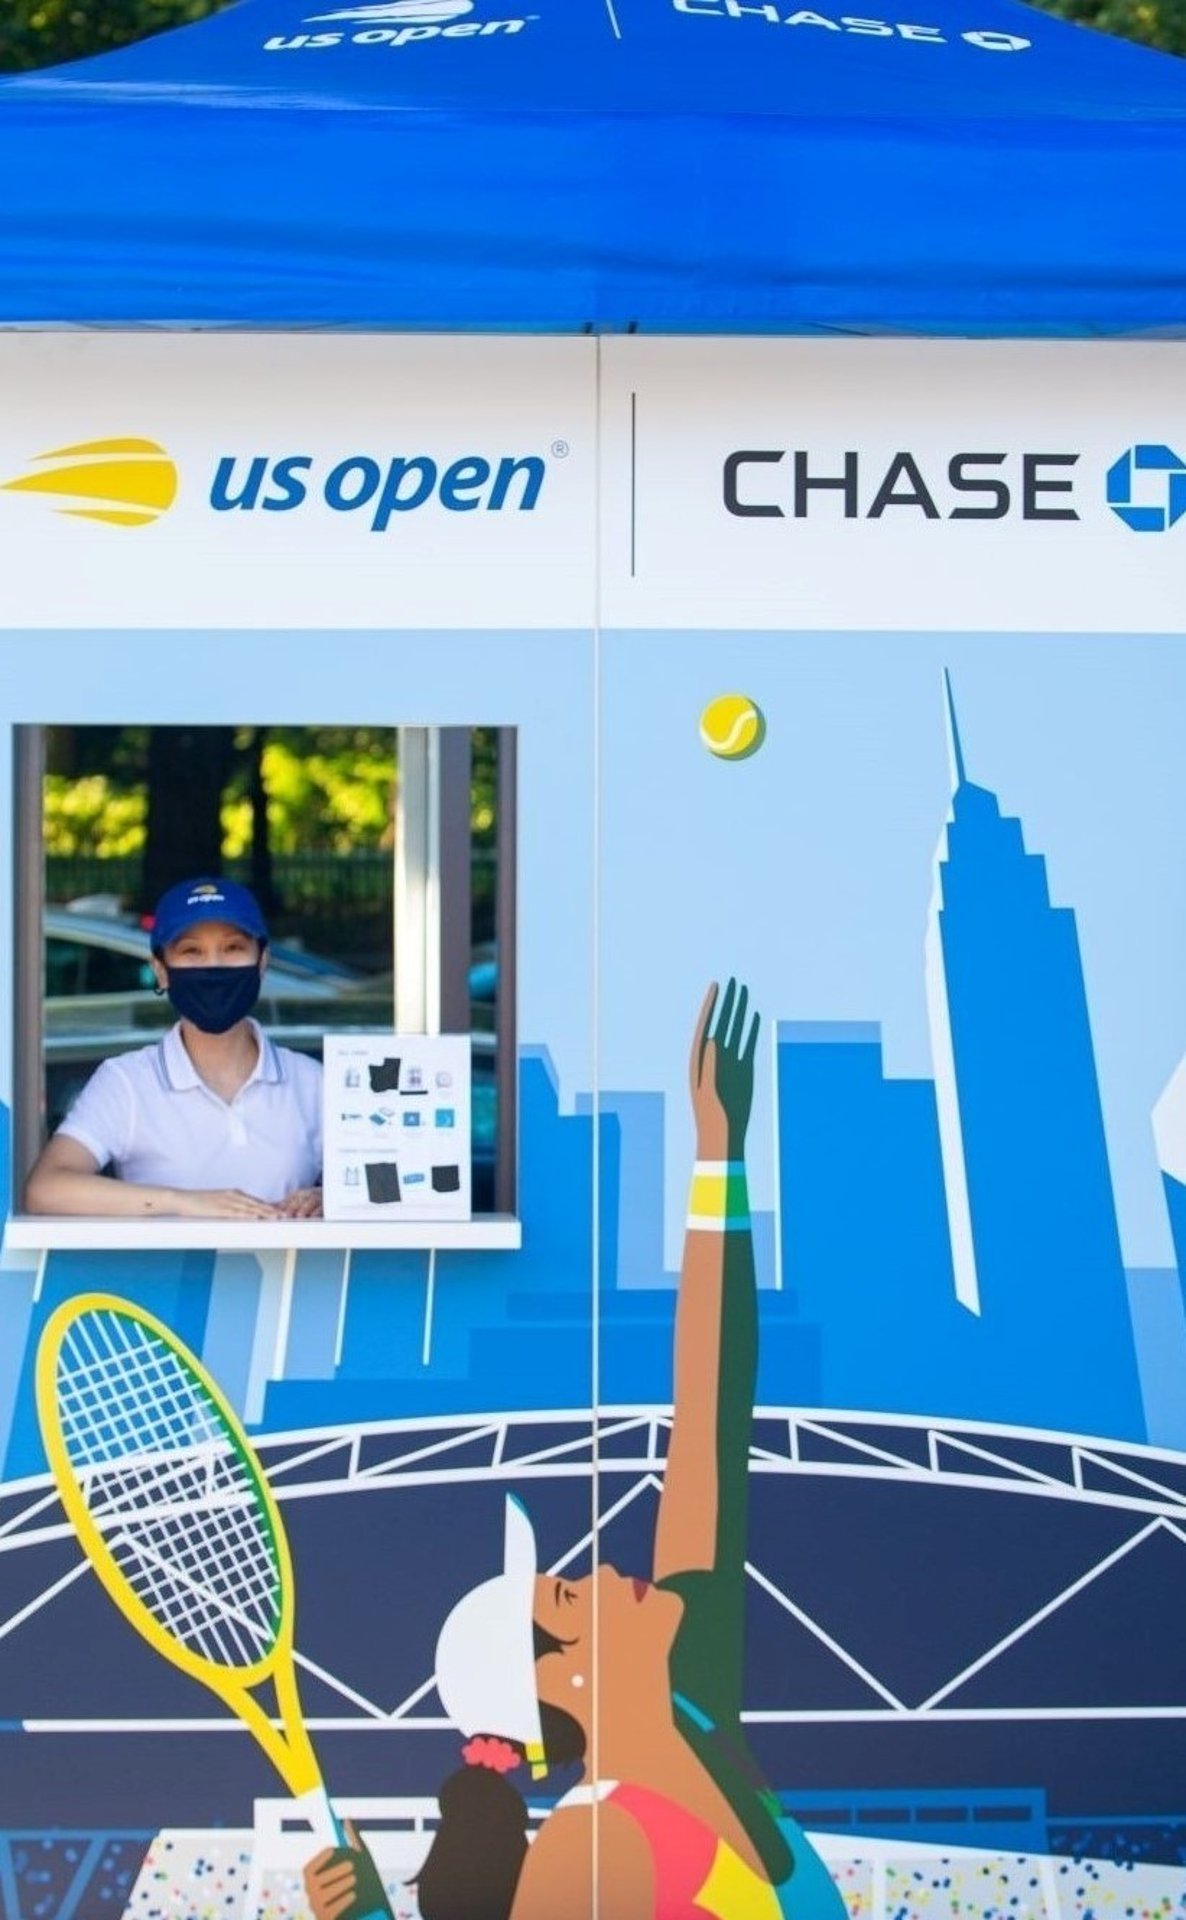 Chase US Open Experiential Activation in New York, NY